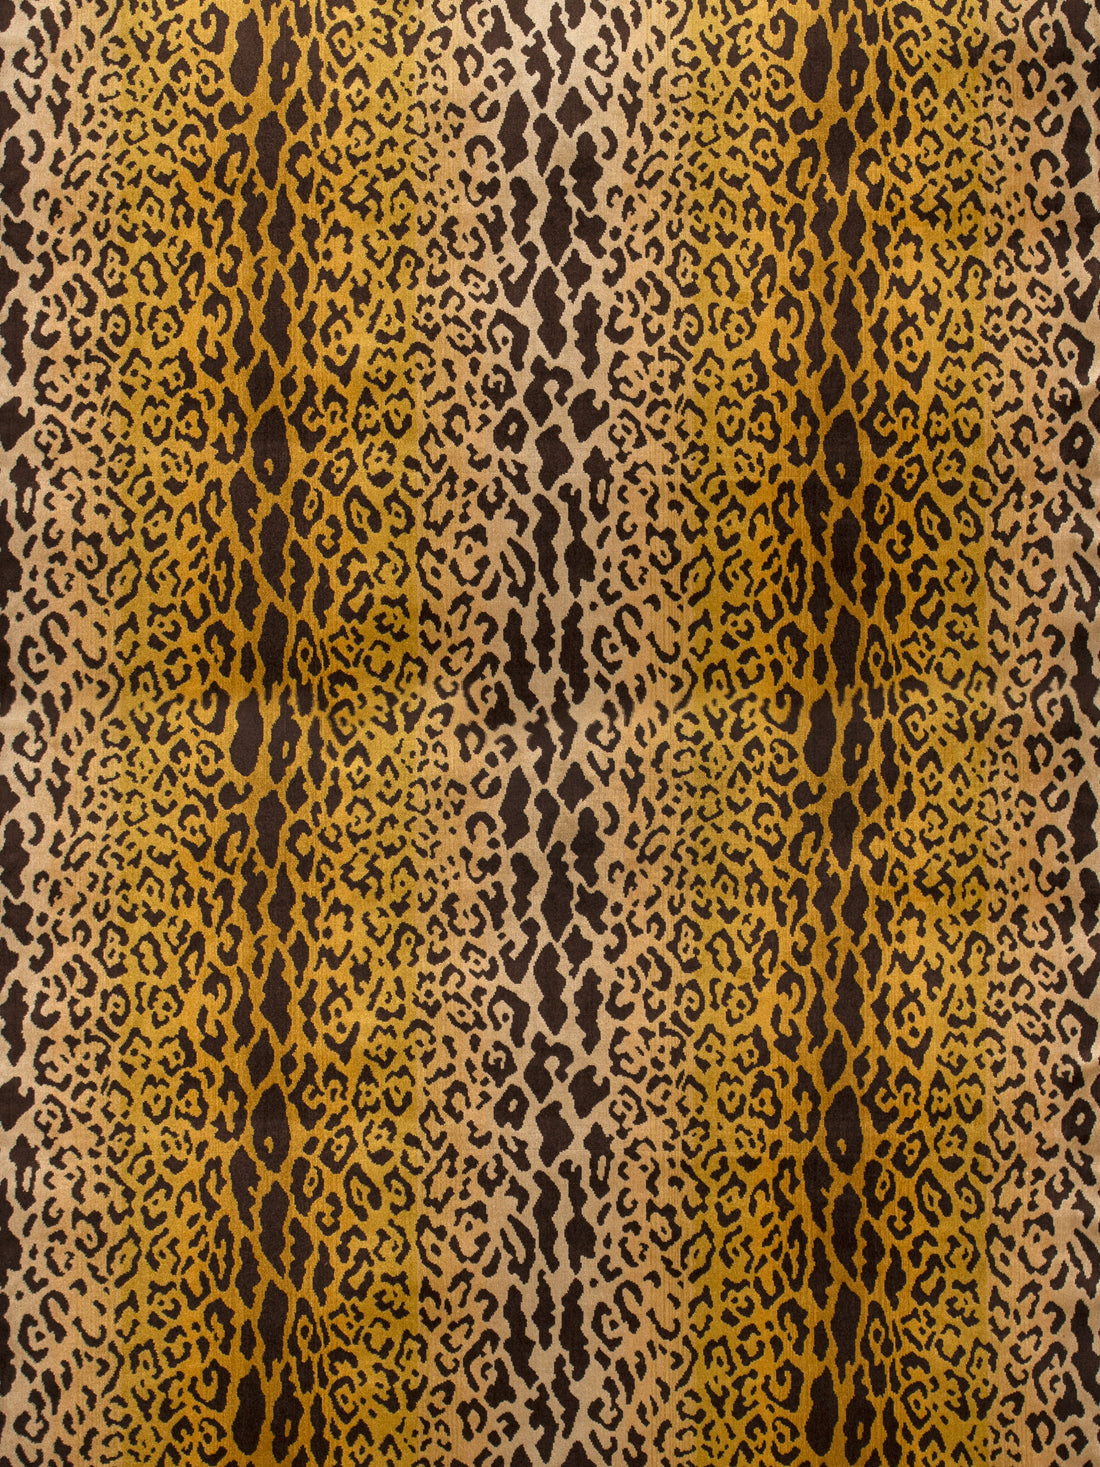 Leopardo fabric in ivory, gold and black color - pattern number SC 000126168MM - by Scalamandre in the Scalamandre Fabrics Book 1 collection